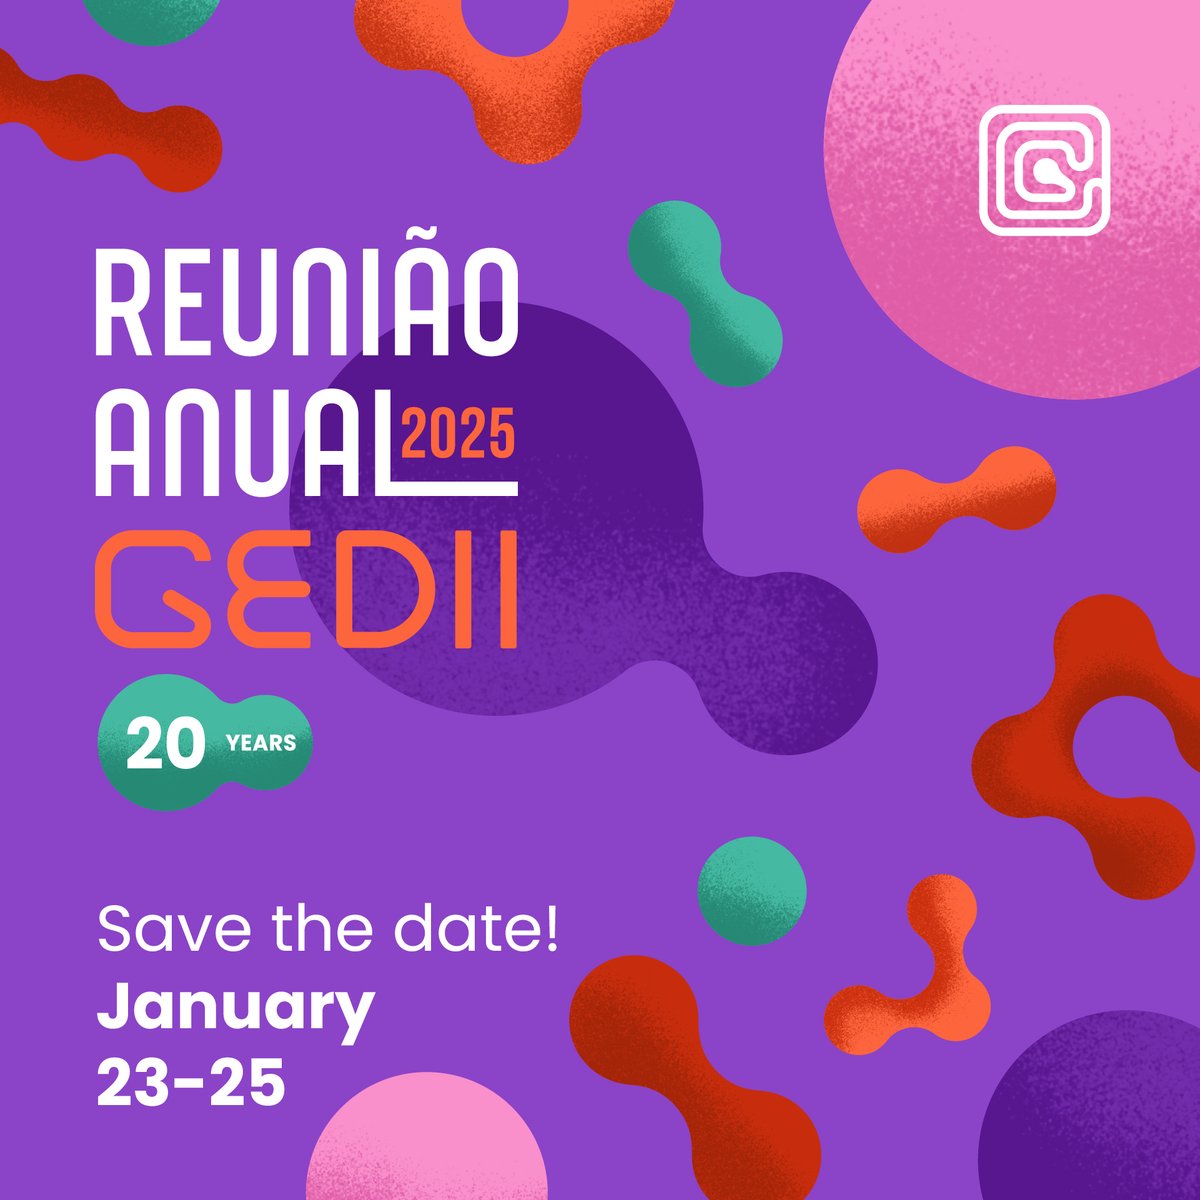 The next edition of GEDII's Annual Meeting will take place from January 23 to 25, 2025. Join us as we celebrate 20 years of GEDII! See you there! #GEDII25 #20YearsOfGEDII